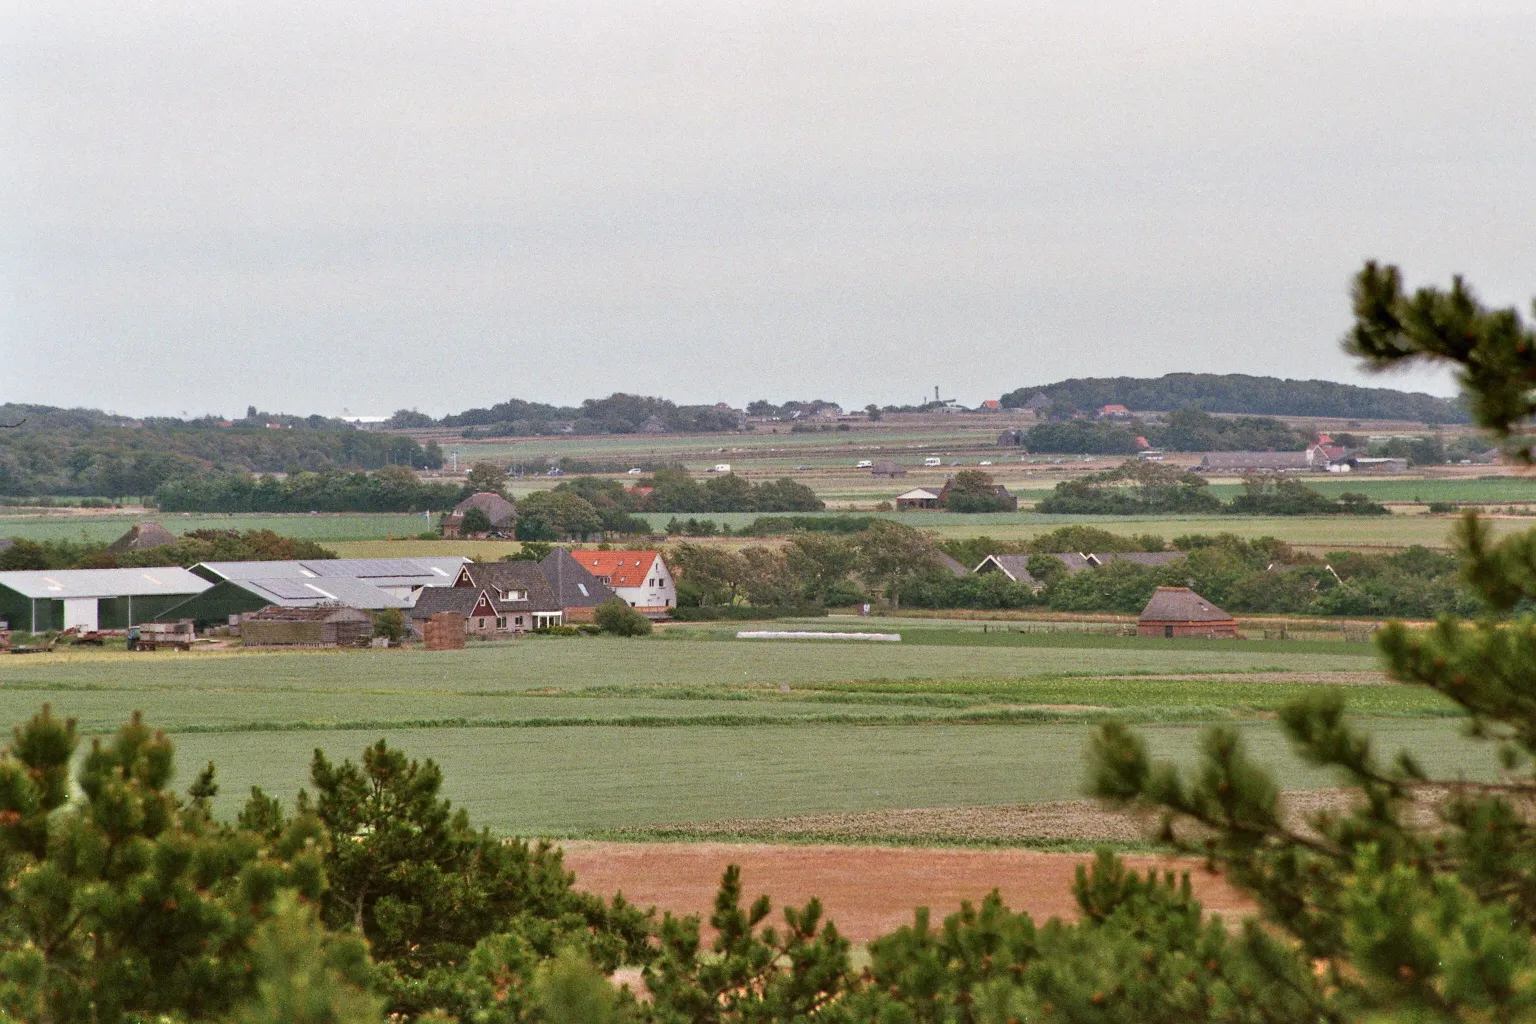 Photo showing: Seen from the Observation tower  "Fonteinsnol" in the sanddunes: The landscape Hoge Berg on the island Texel.
Camera: Canon Eos 3000
Film: Fujifilm Superia X-tra 400 ISO

Lens: Tamron AF70-300mm